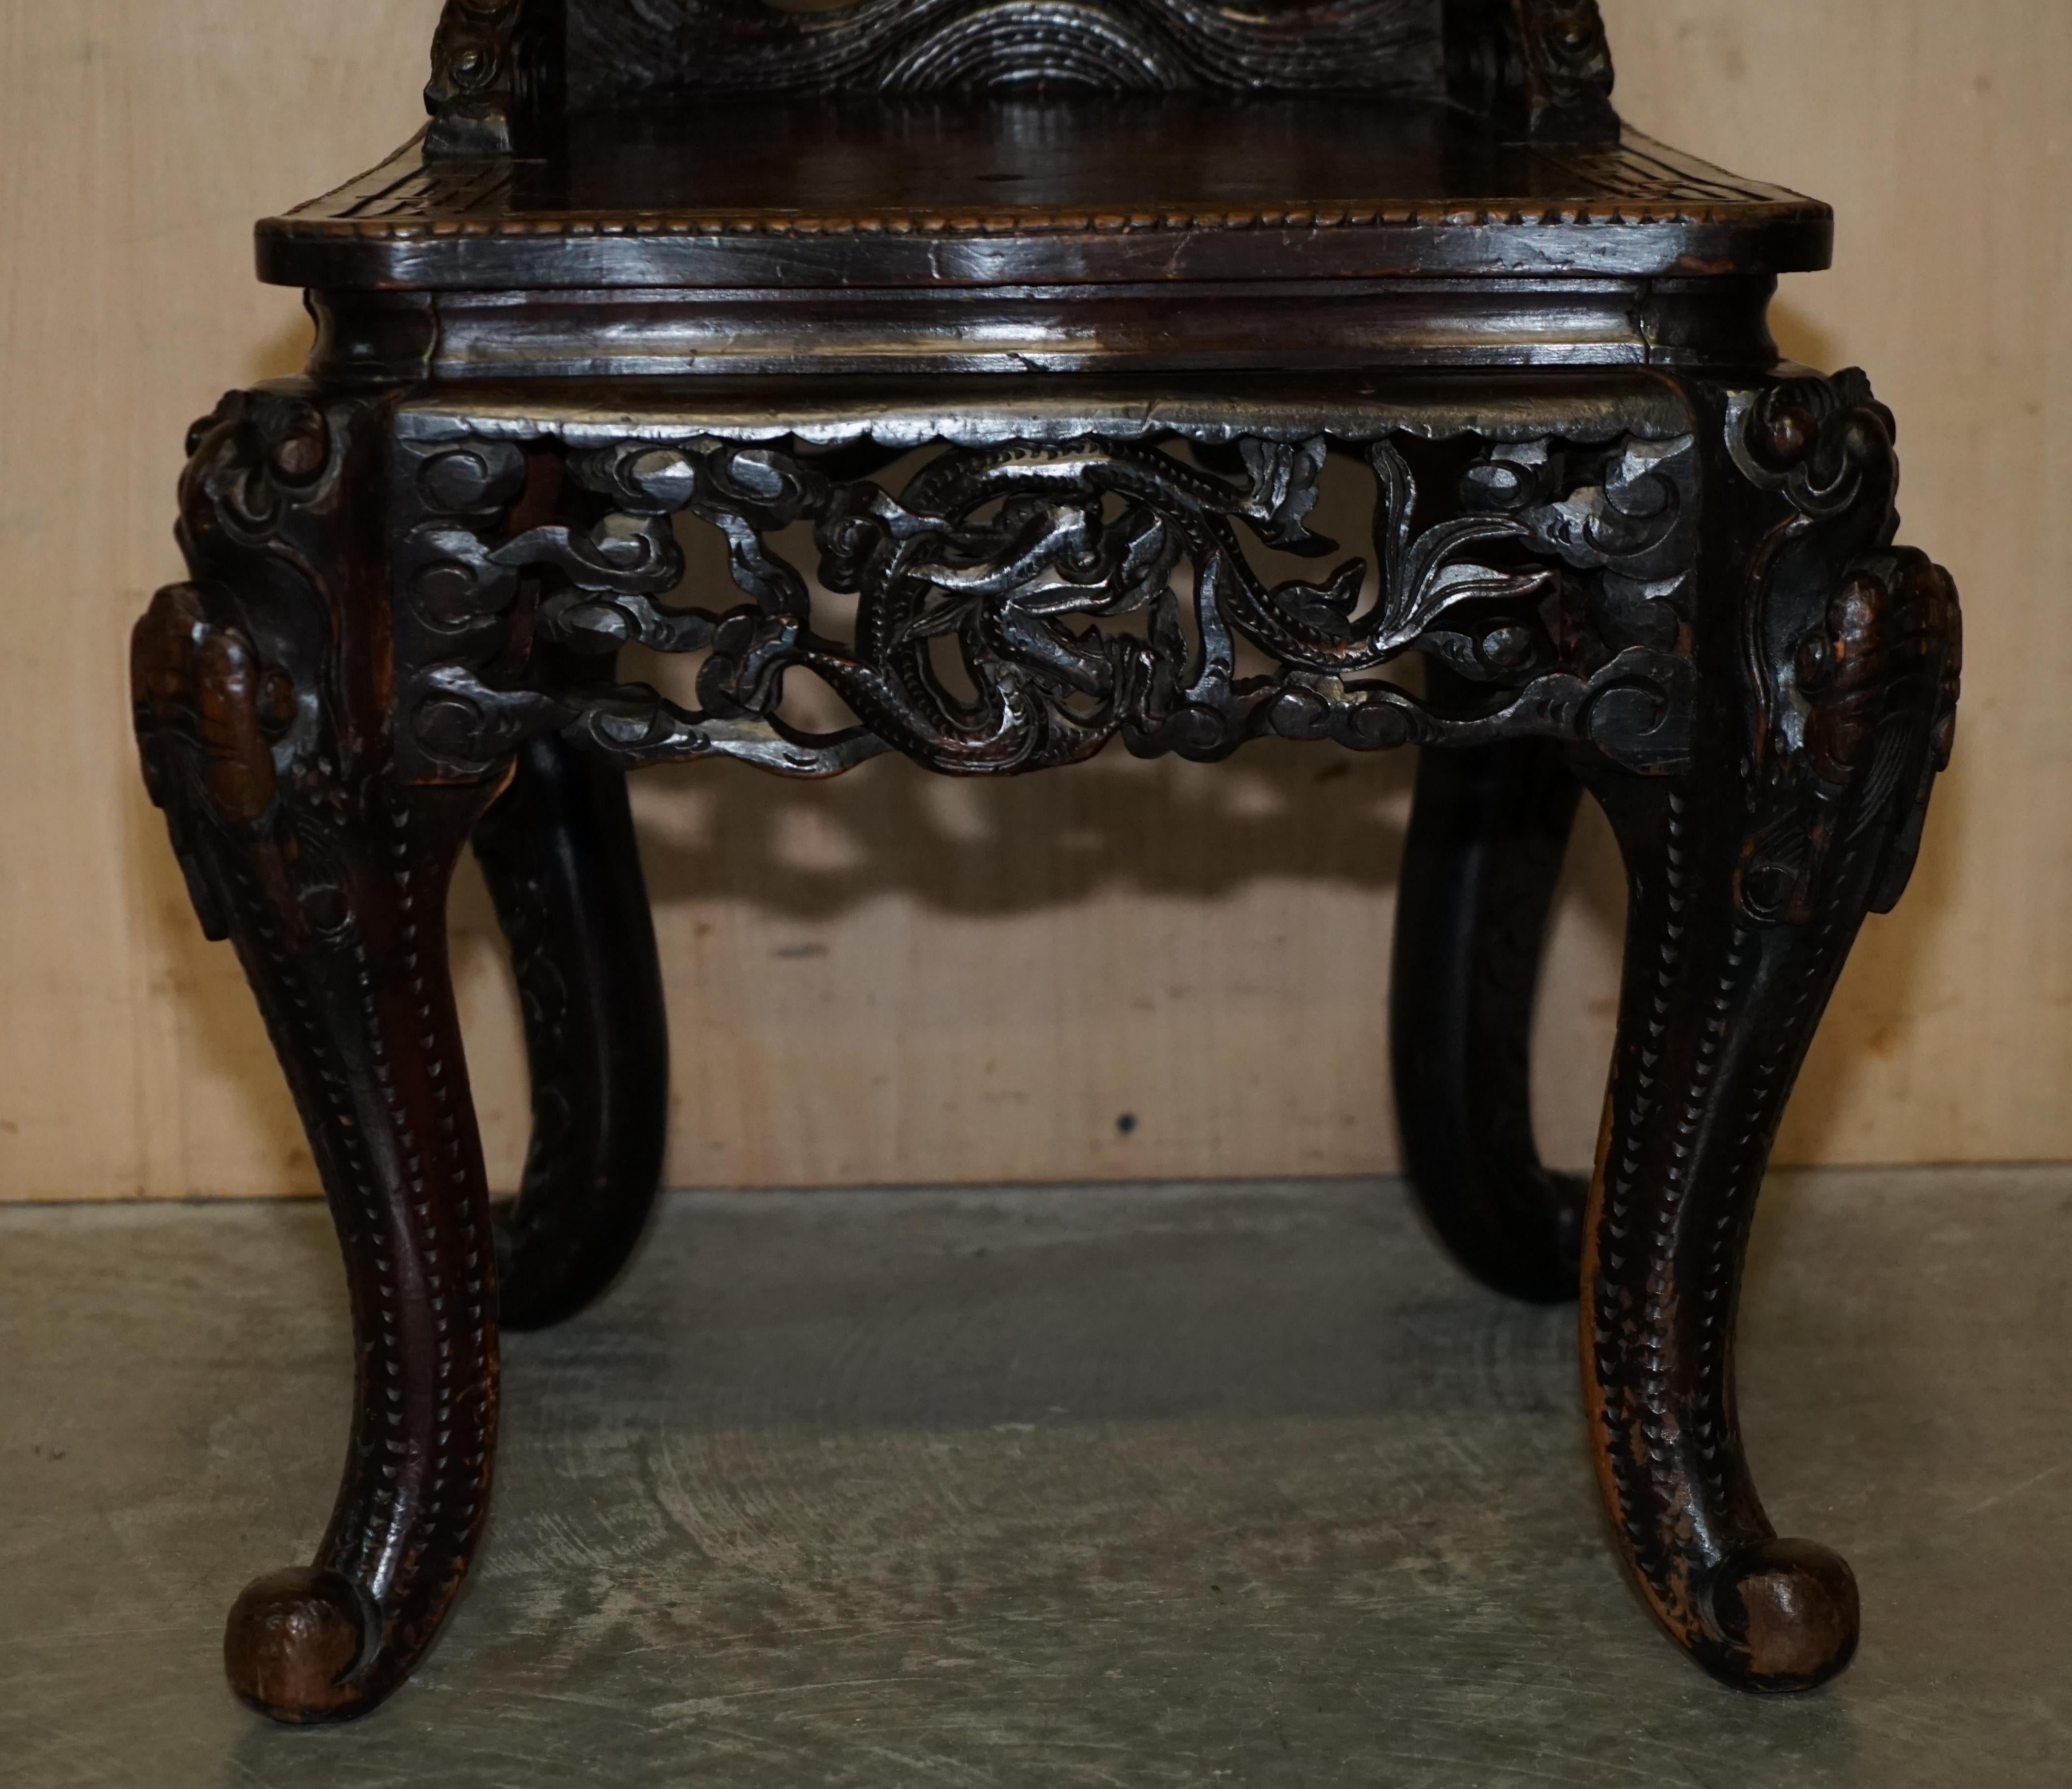 Lovely Antique Chinese Export 1920 Qing Dynasty Carved Dragon Throne Armchair For Sale 3